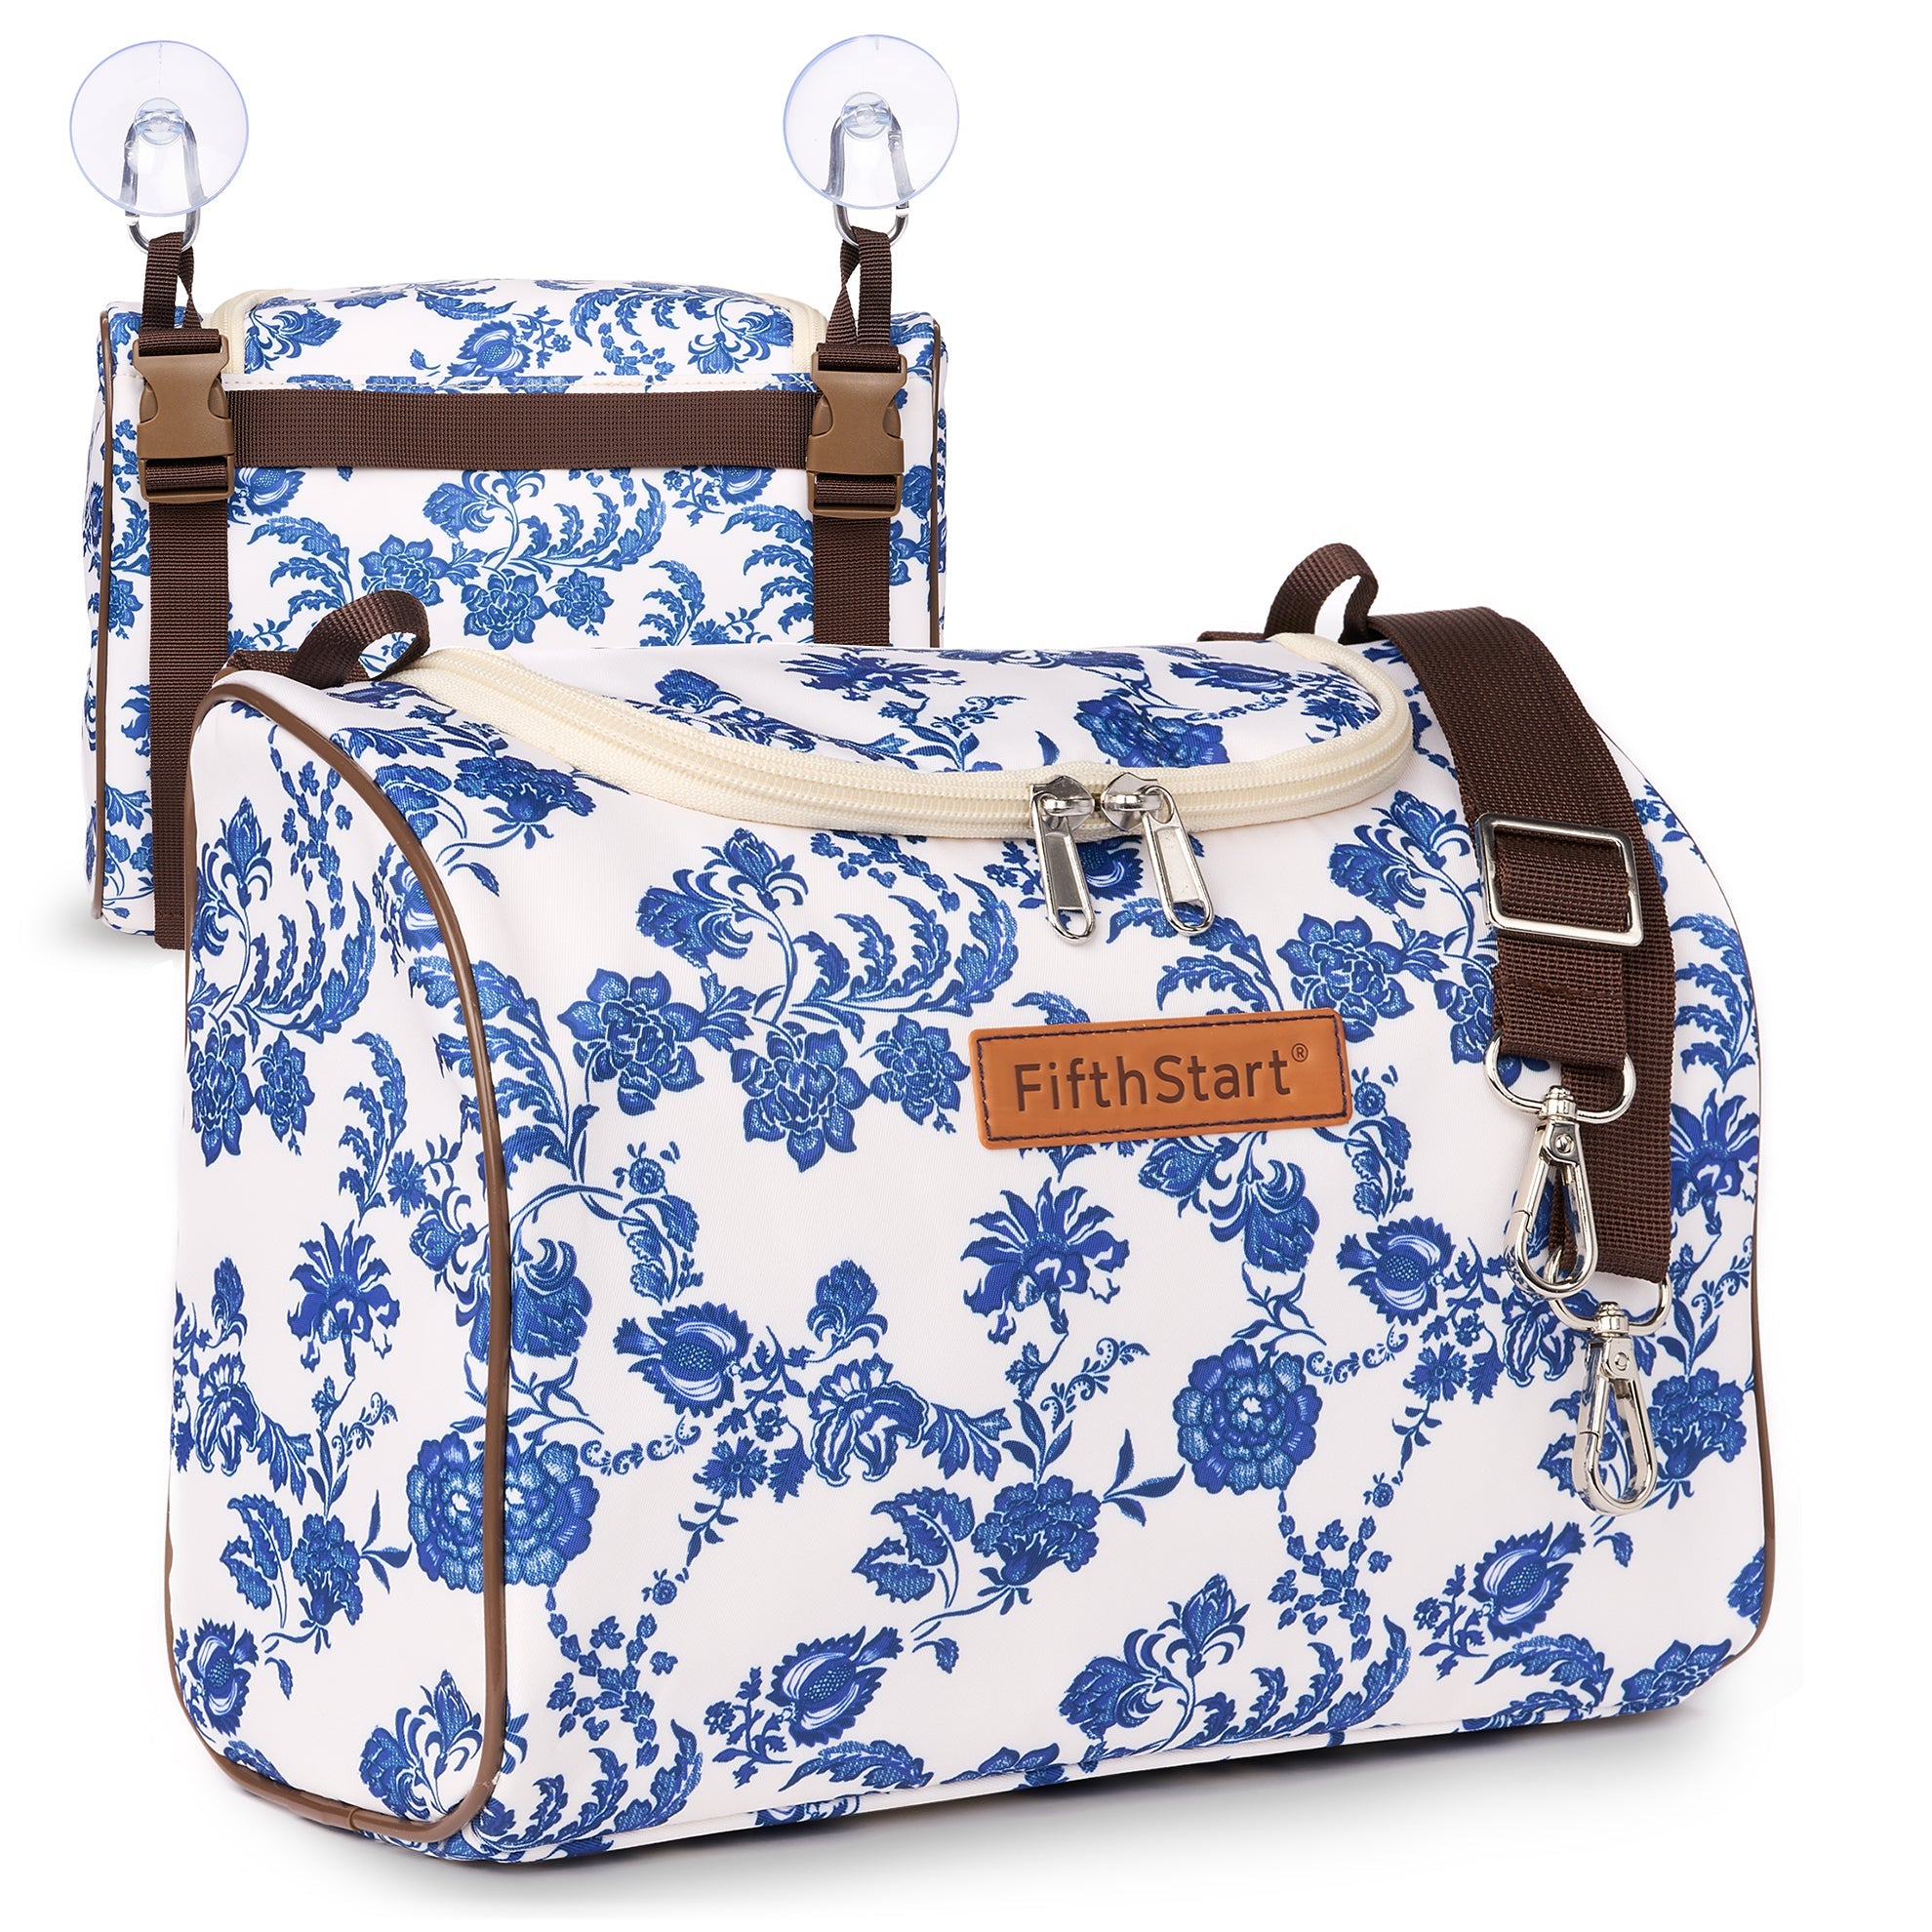 Floral Hanging Travel Case - Perfect for Your Next Adventure!